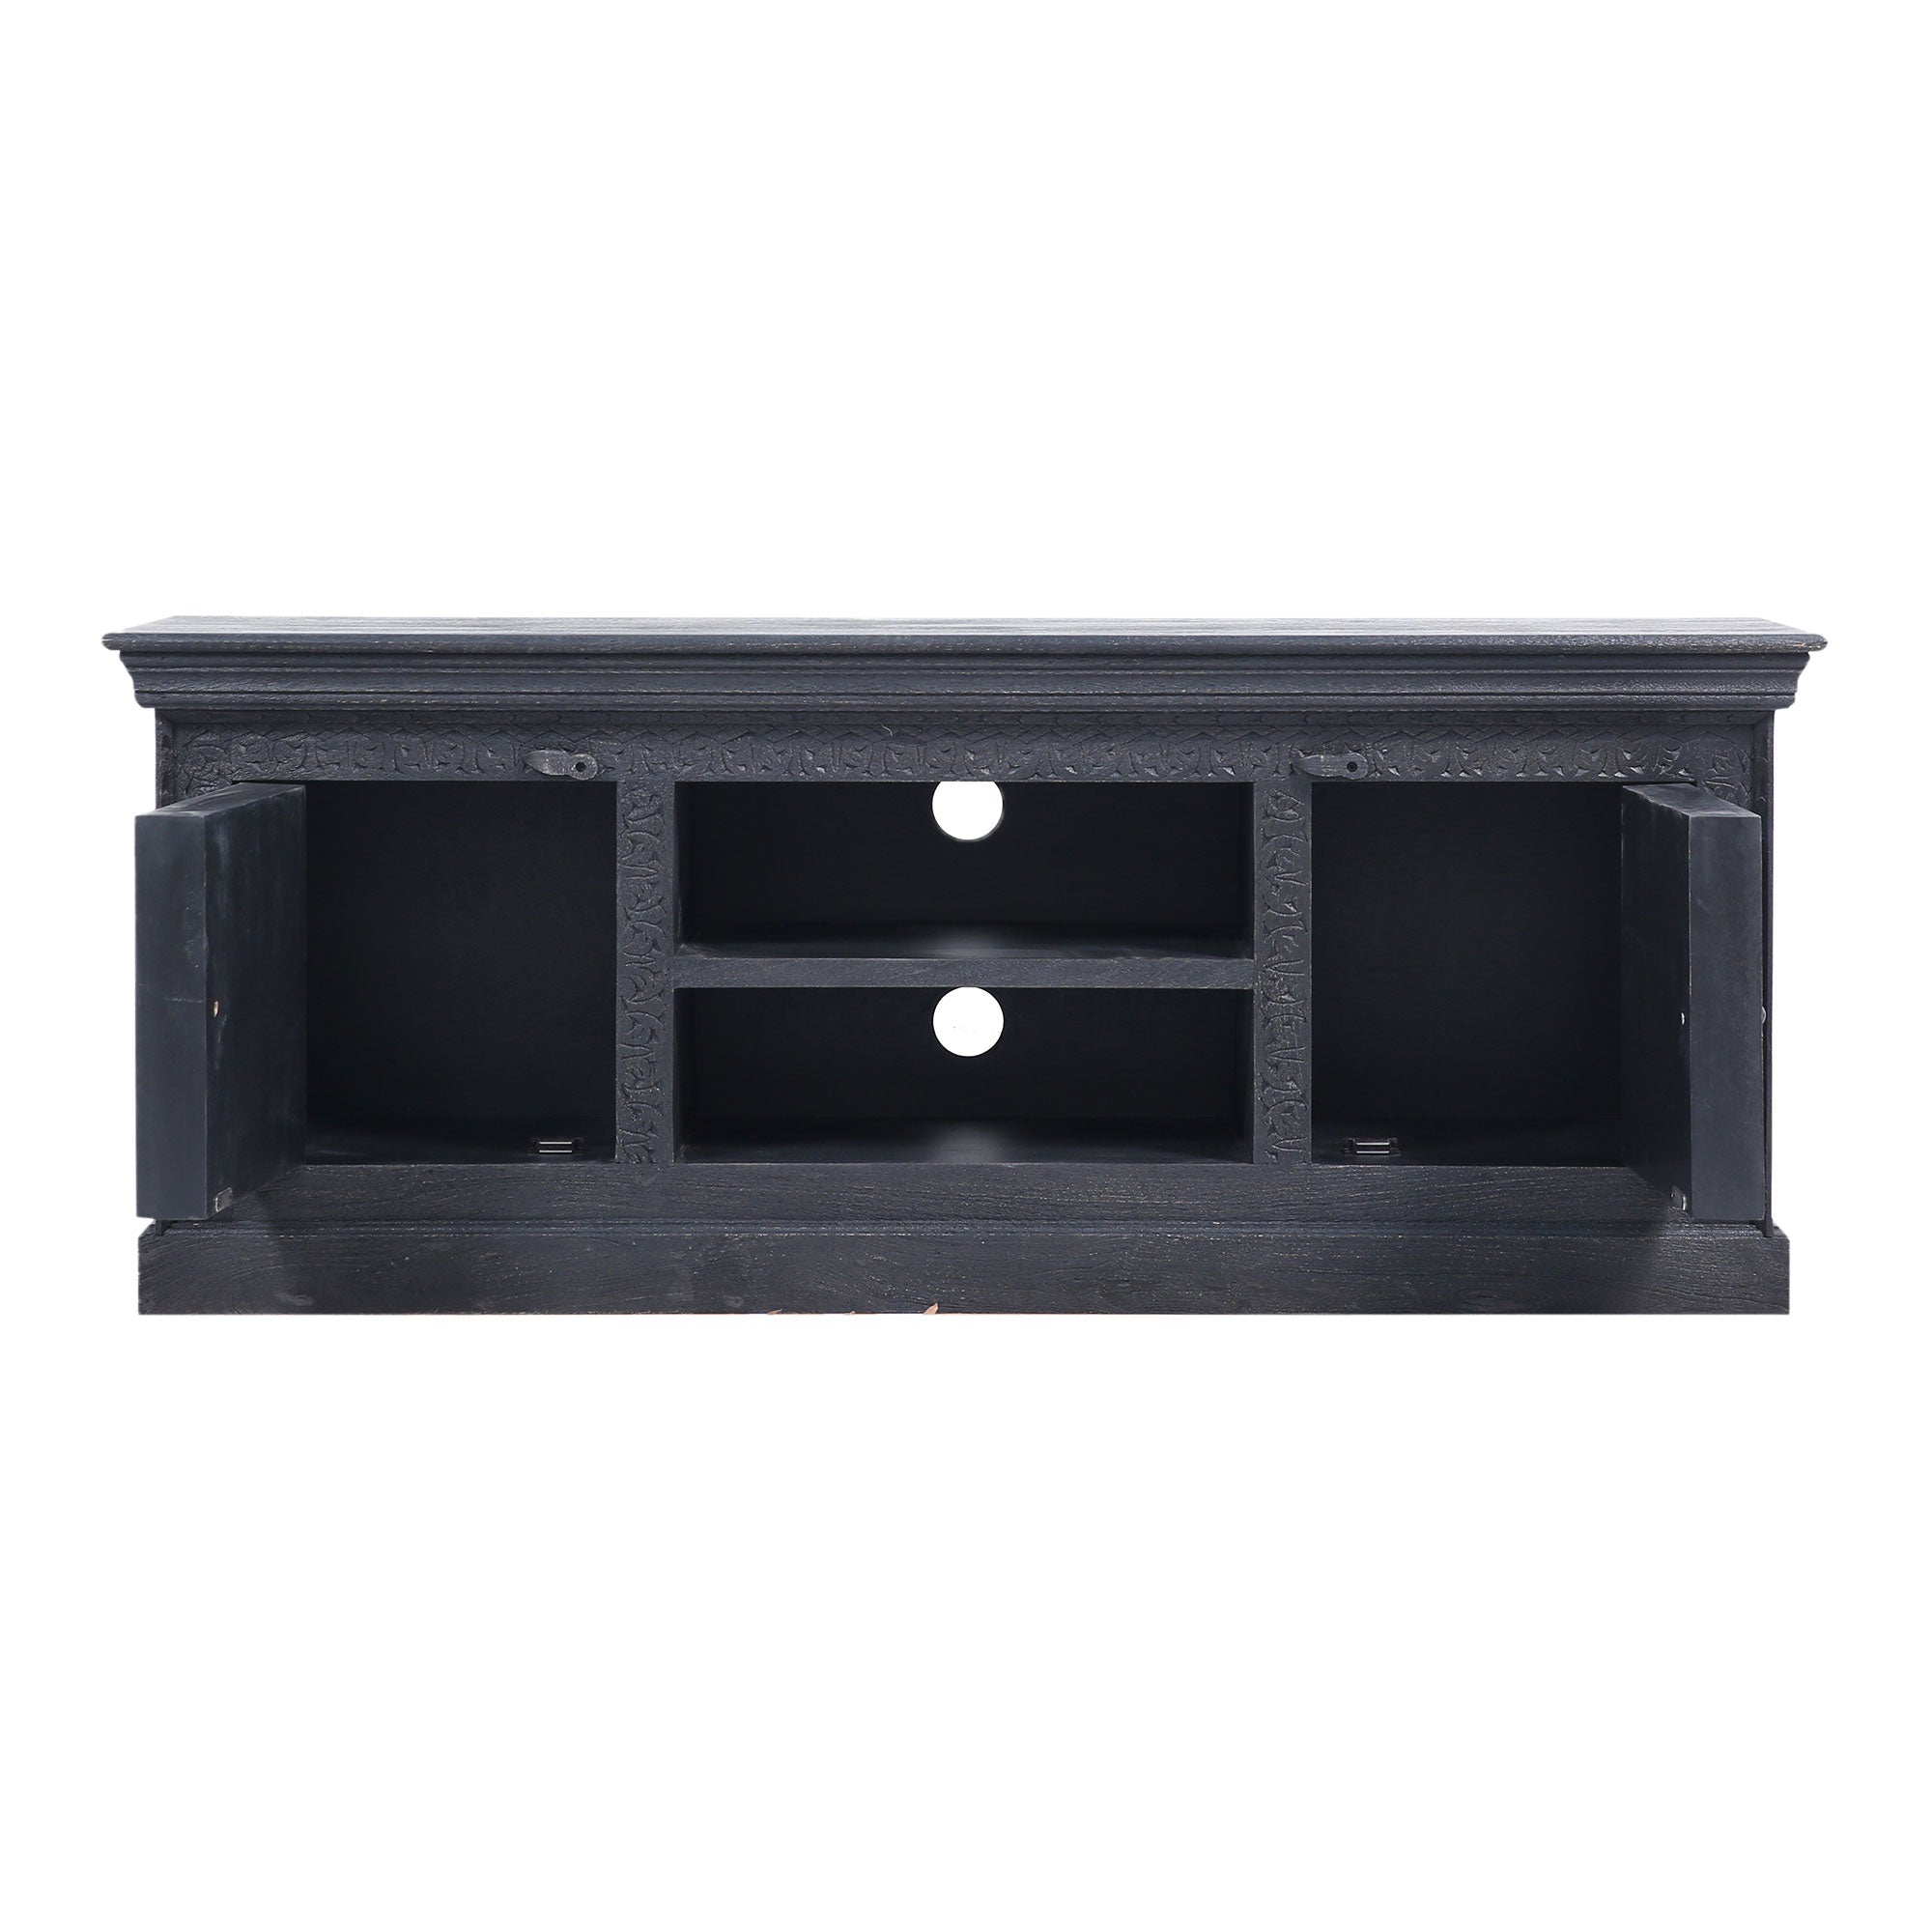 Mahala Nomad Wooden Media Unit in Distressed Black Finish in Media Units by VMInnovations